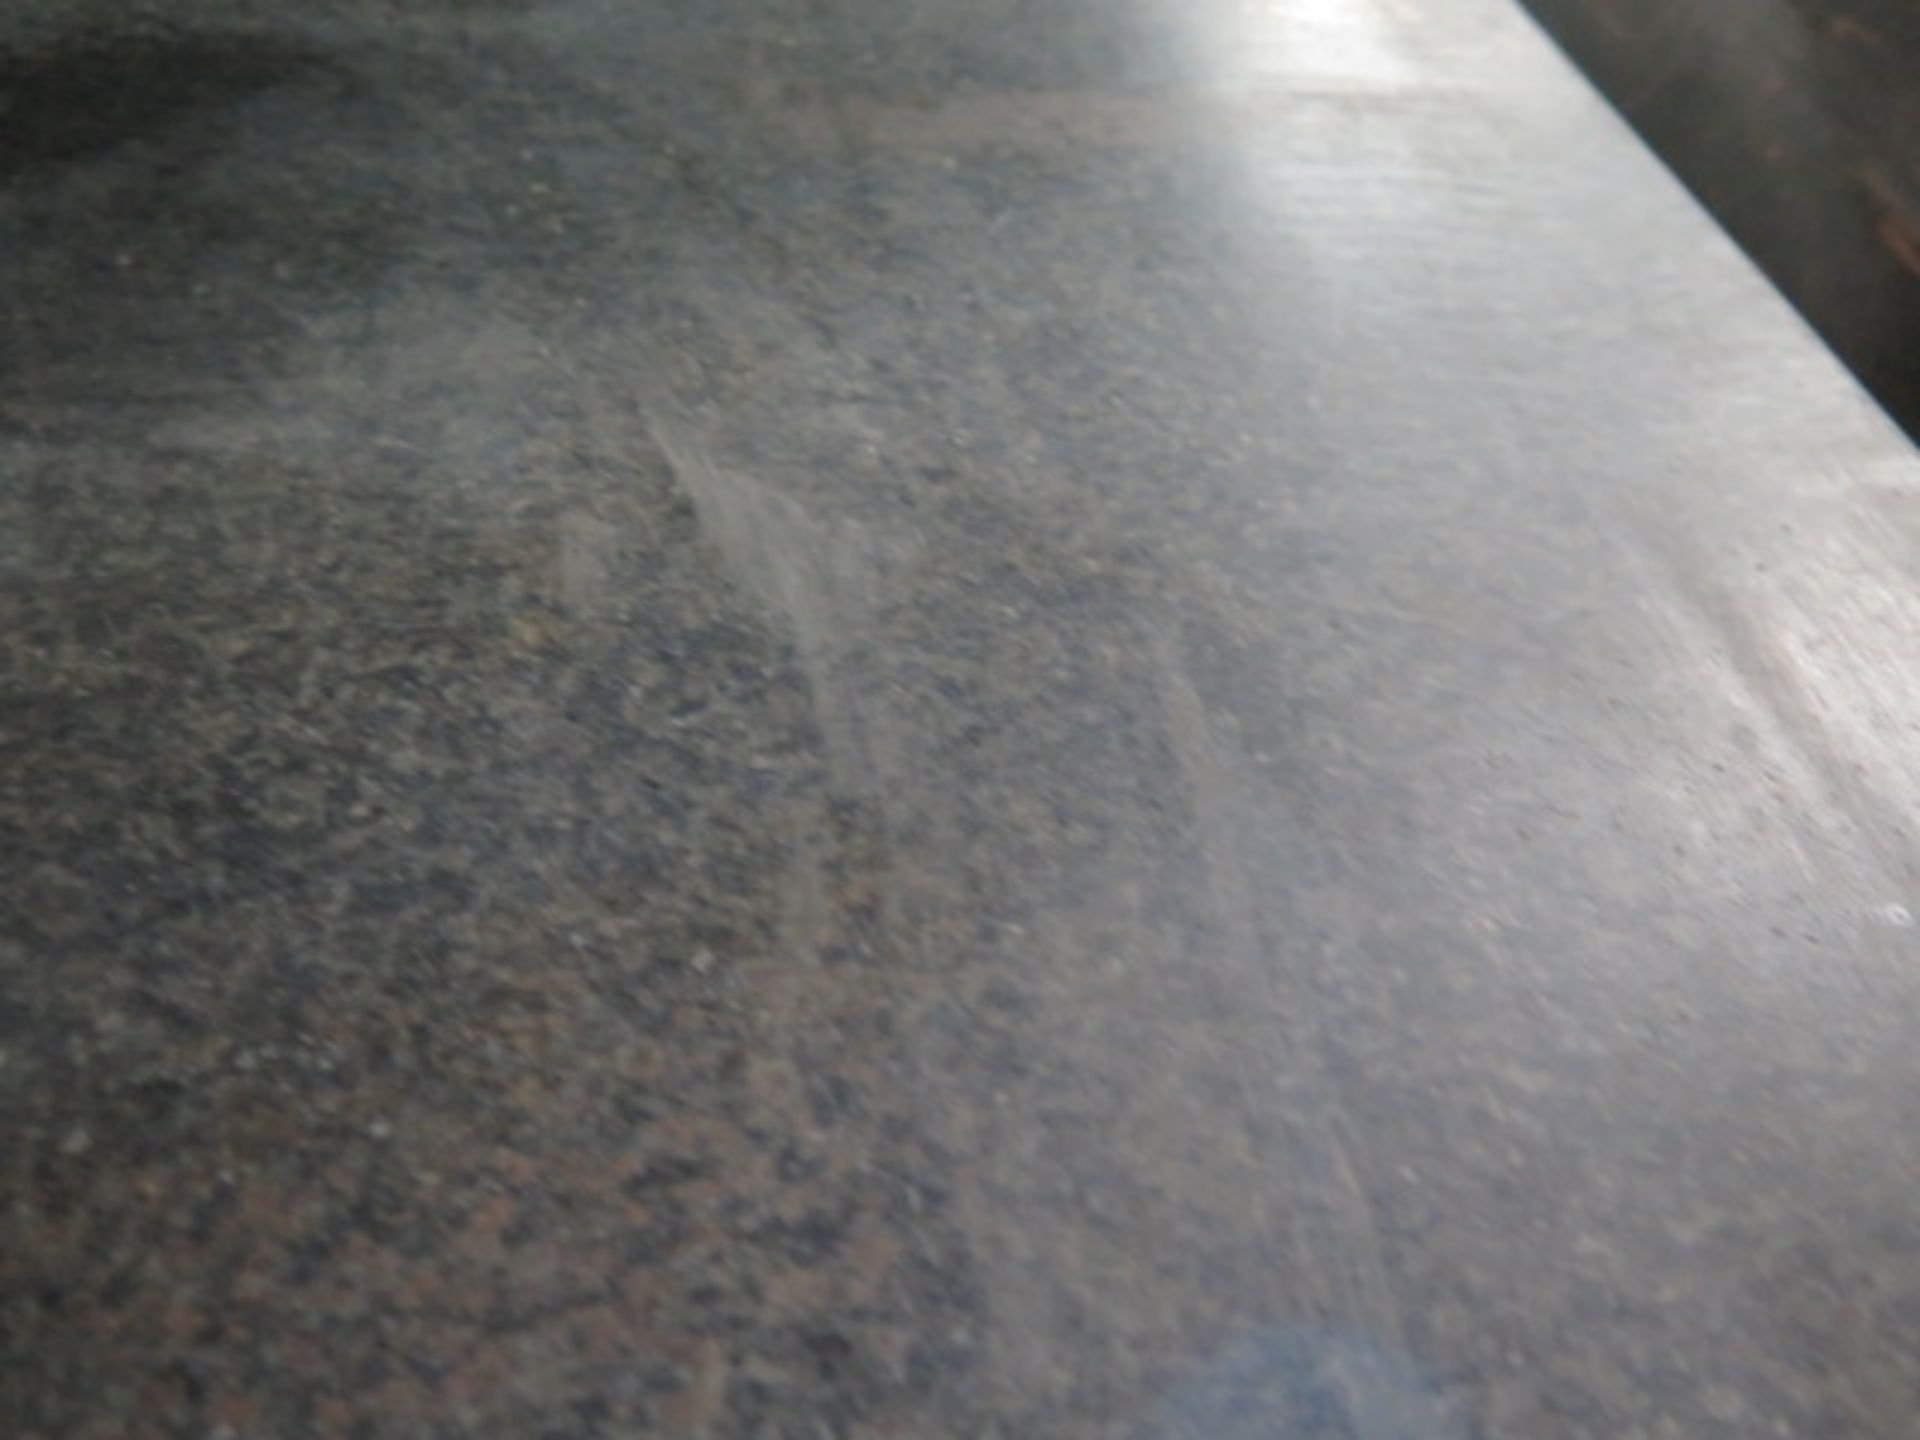 24" x 36" x 6" Granite Surface Plate w/ Rolling Stand (SOLD AS-IS - NO WARRANTY) - Image 6 of 6